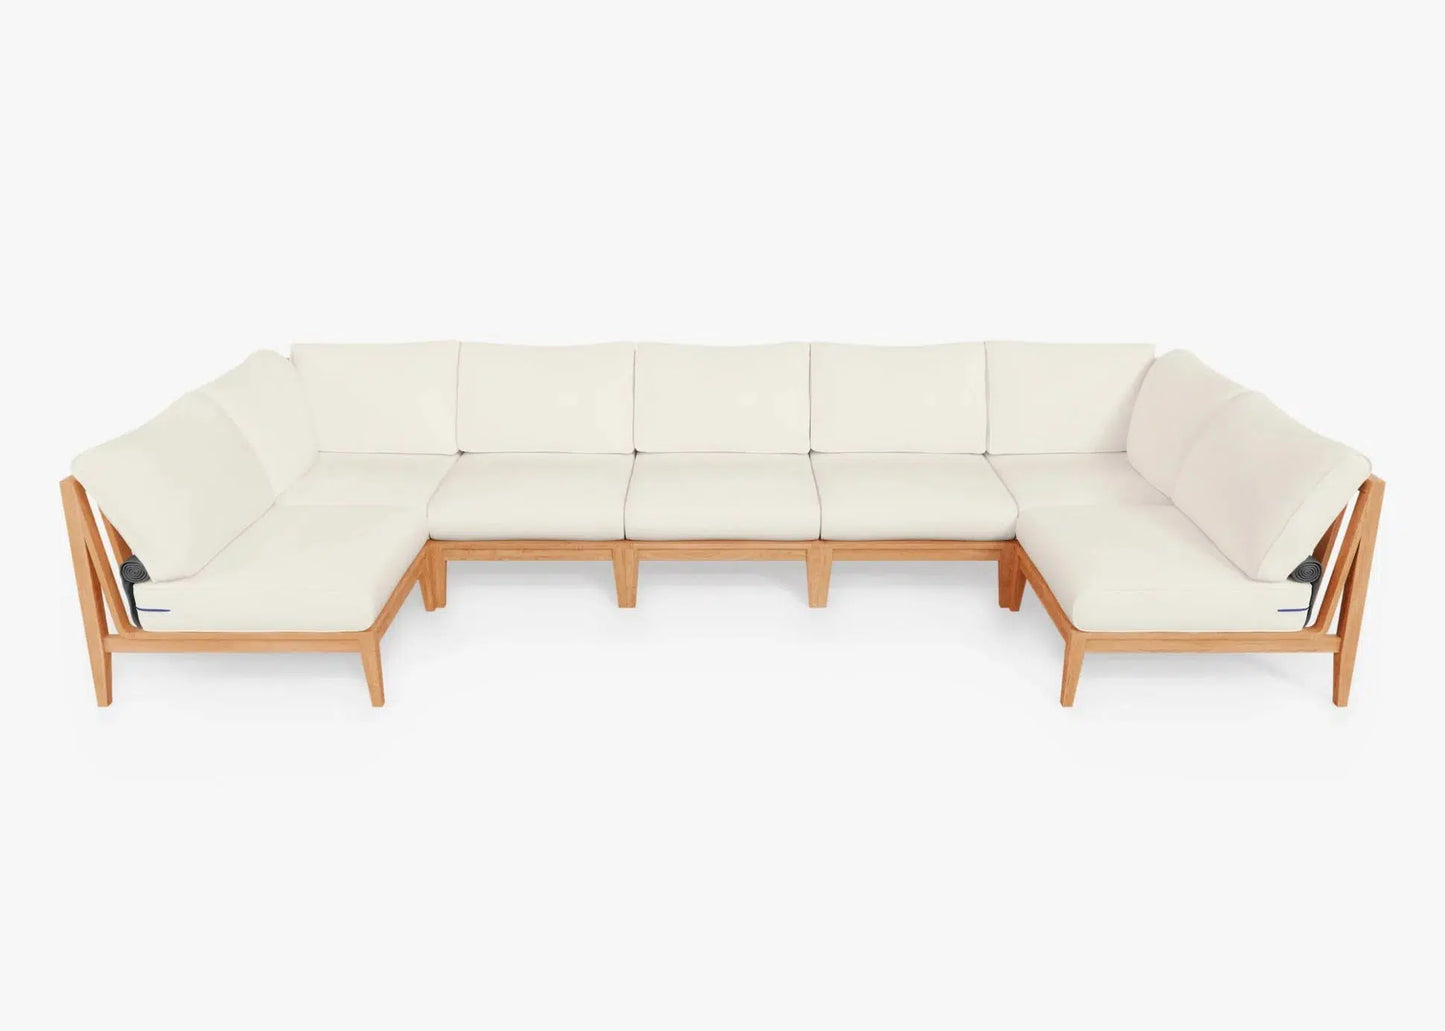 Live Outer 156" x 64" Teak Outdoor U Shape Sectional 7-Seat With Palisades Cream Cushion